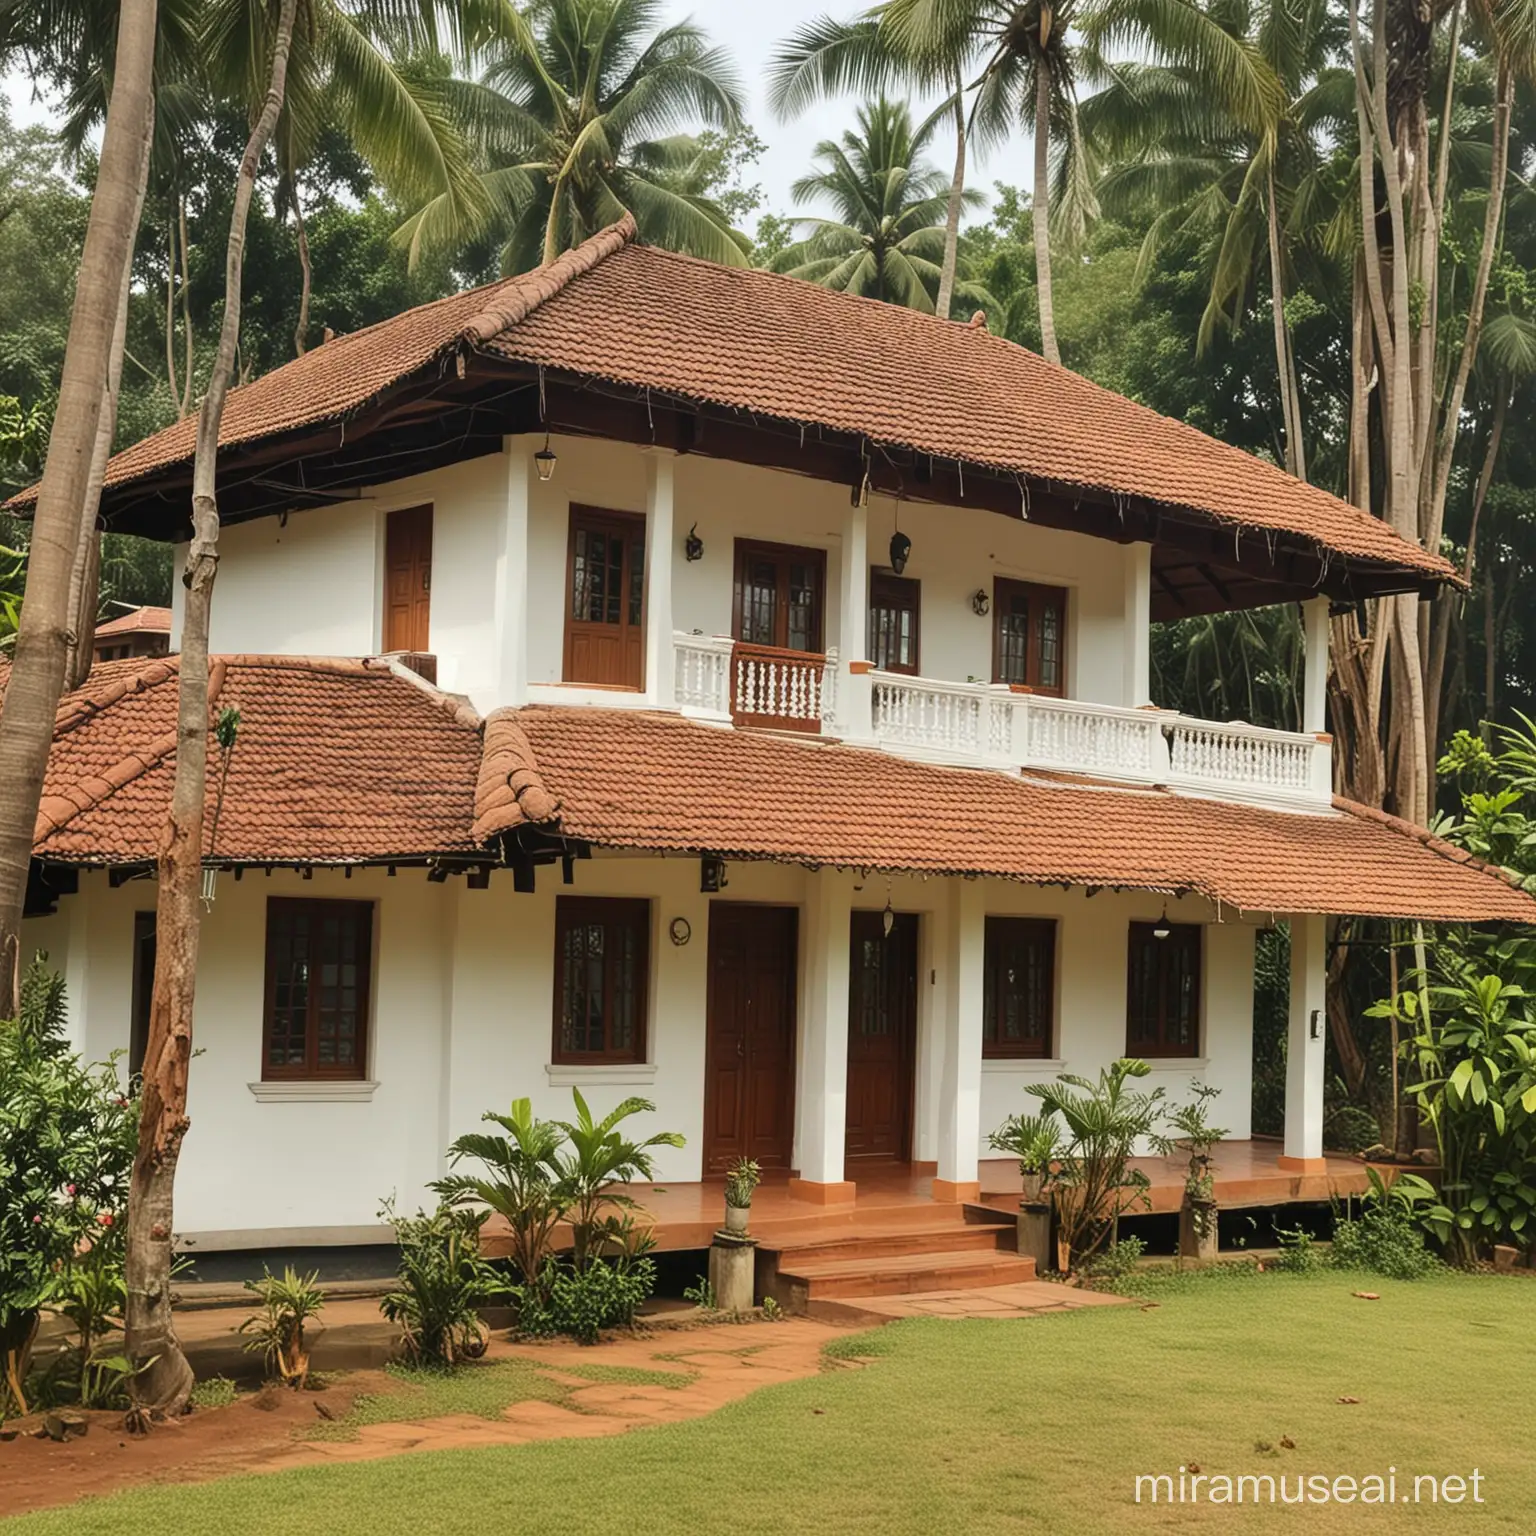 Traditional Kerala Homestay Experience Family Enjoying Coconut Palm Thatched House